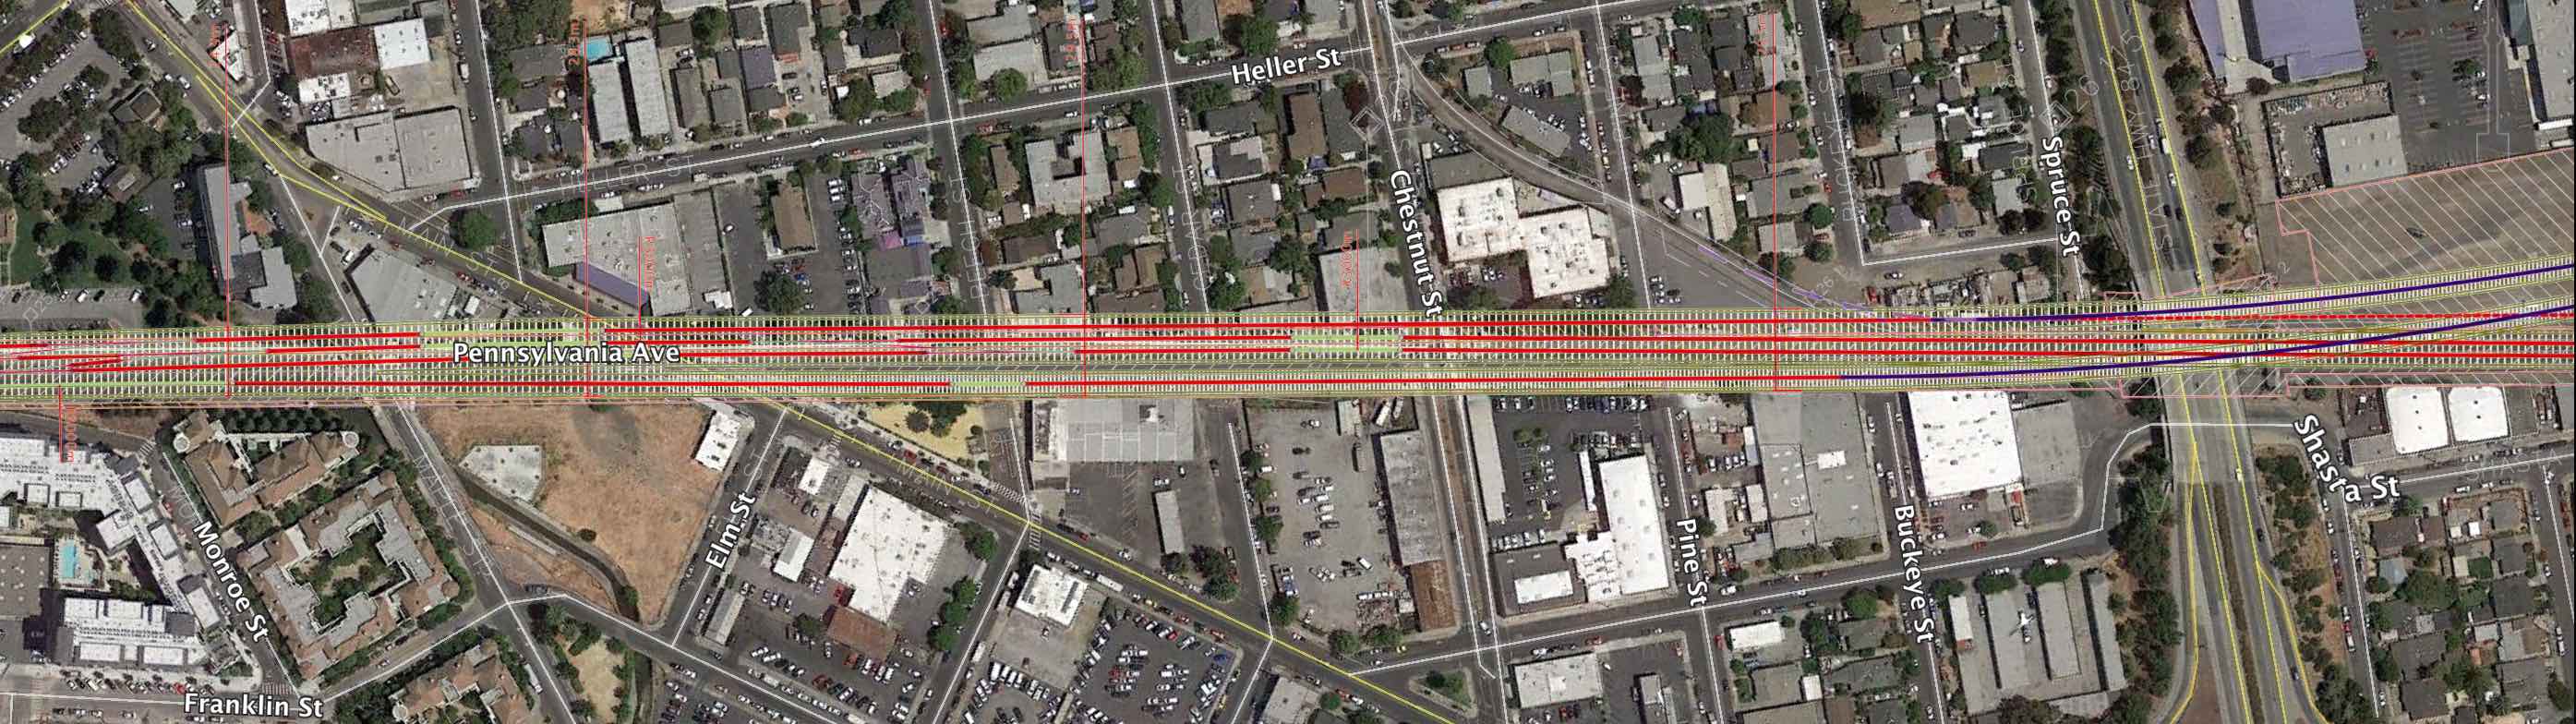 Caltrain HSR Compatibility Blog: Risk and Opportunity in Redwood City